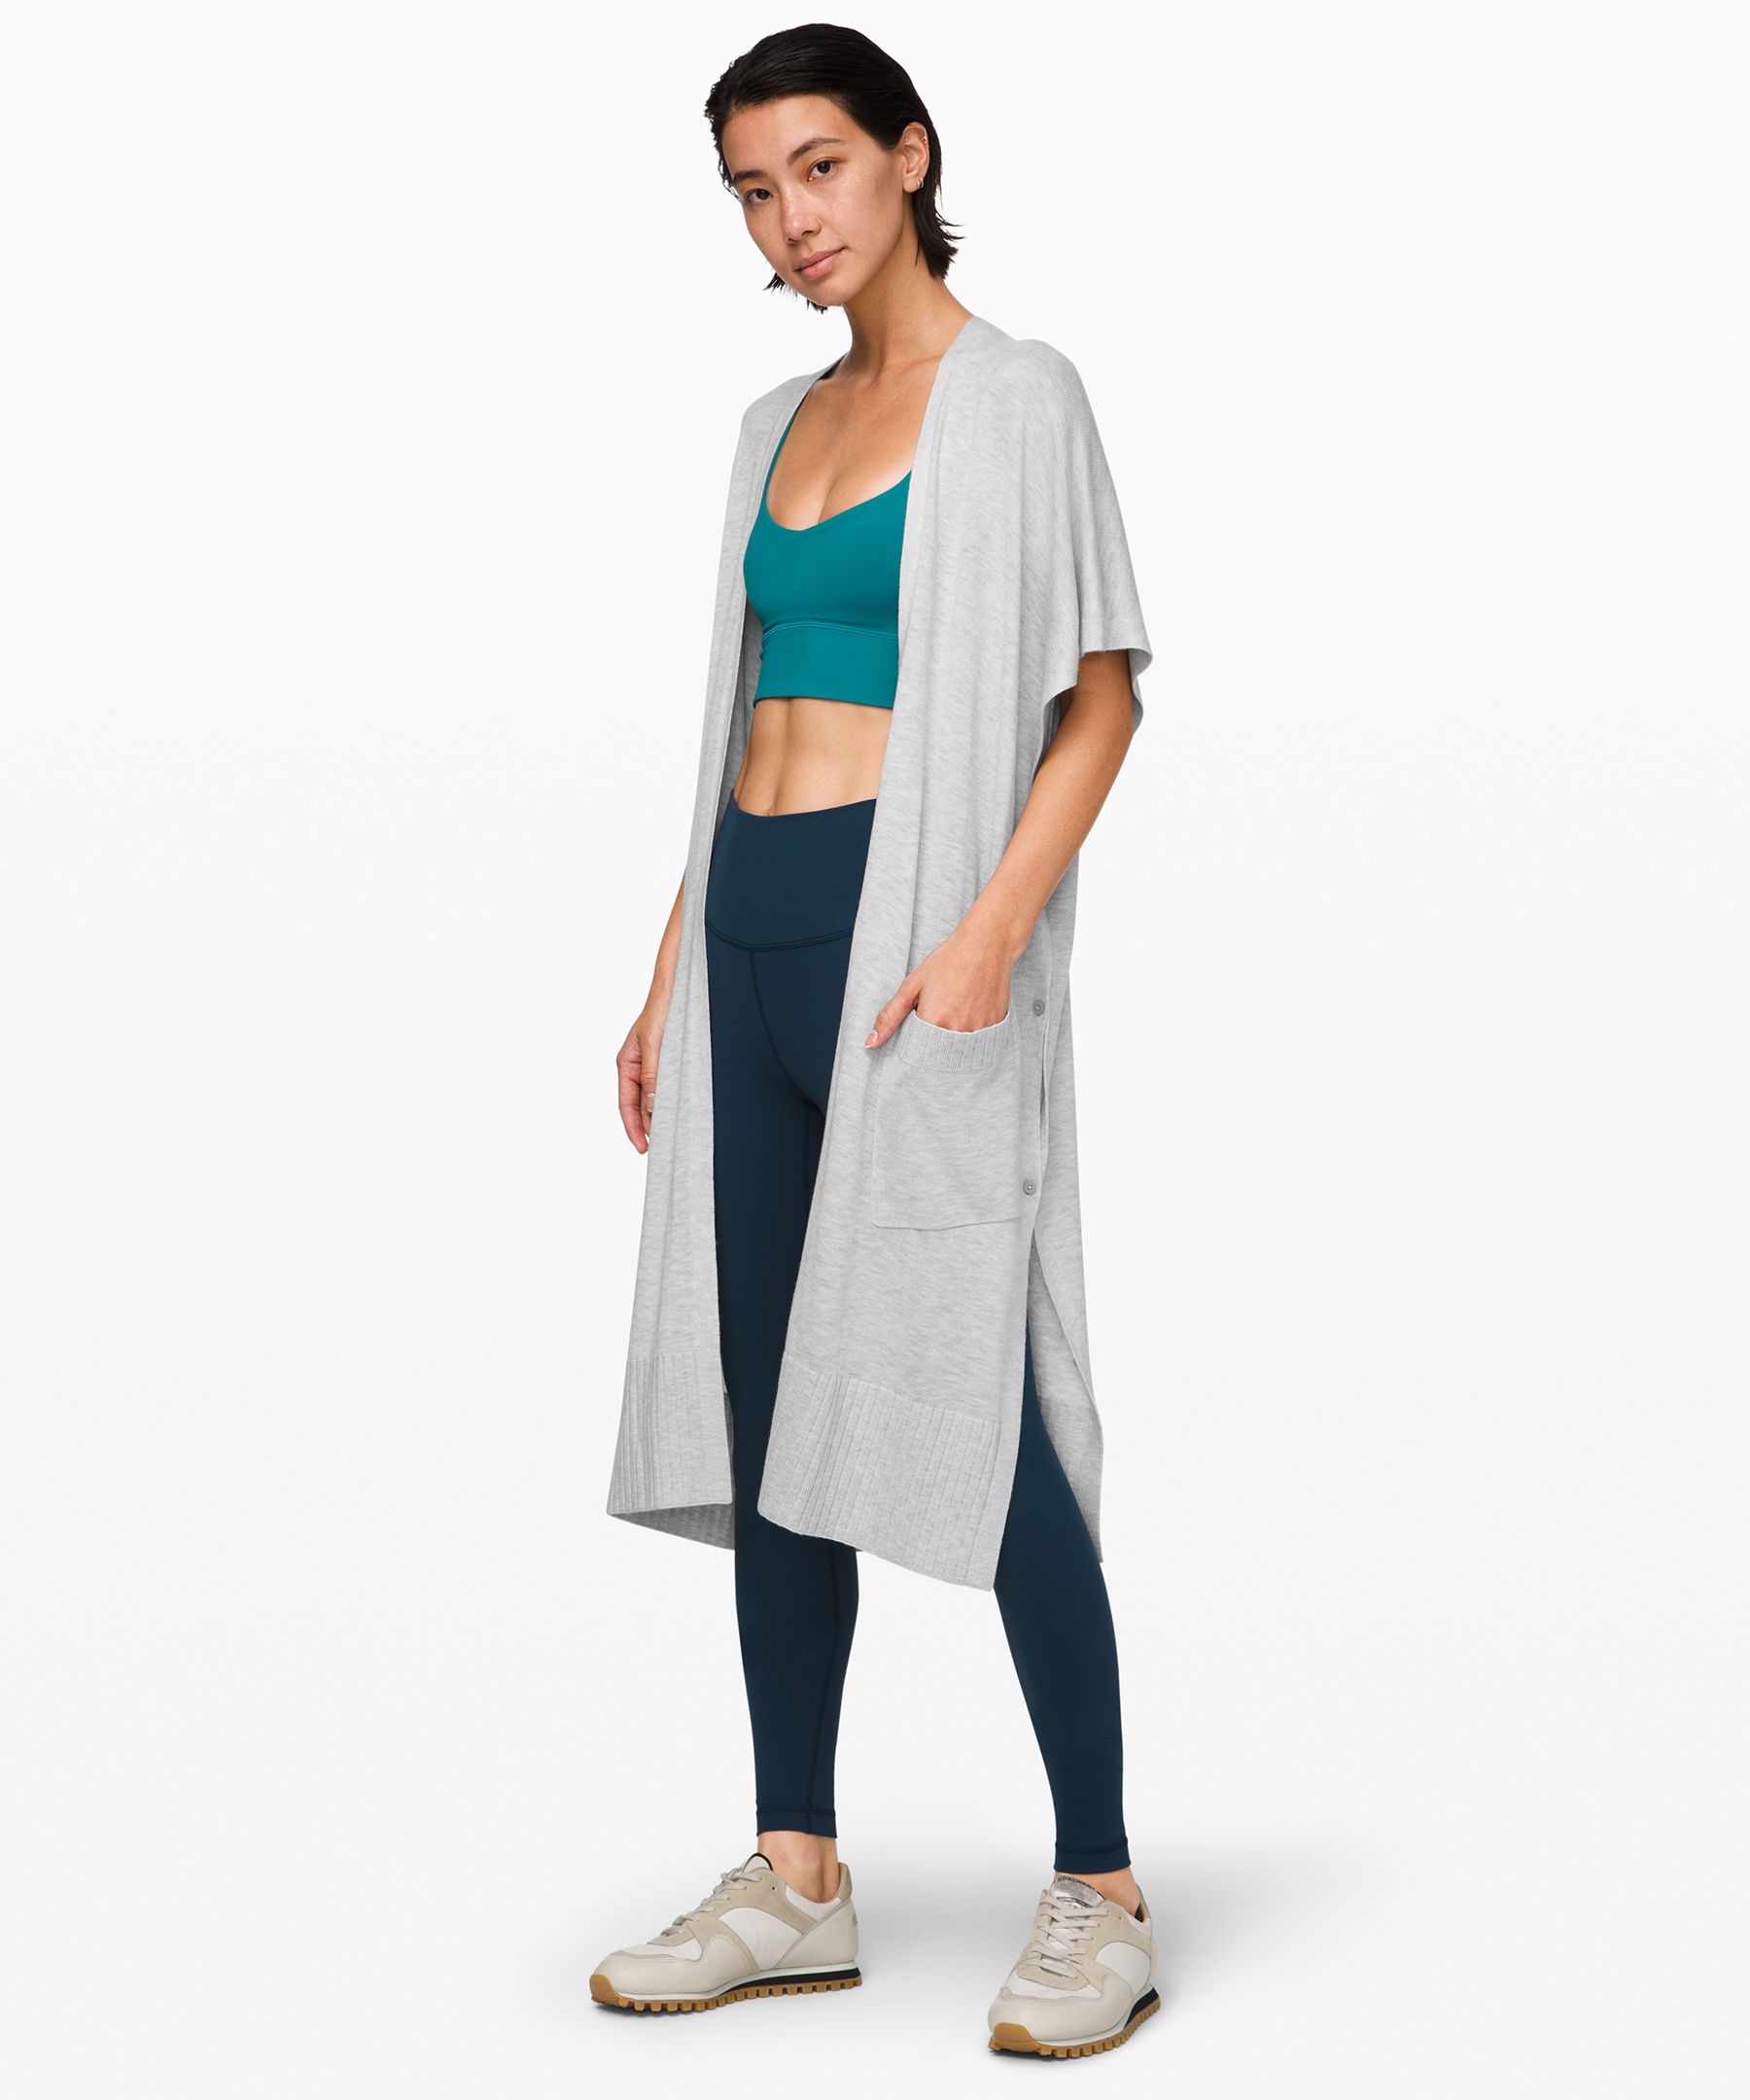 Lululemon On Your Way Wrap In Heathered Core Ultra Light Grey